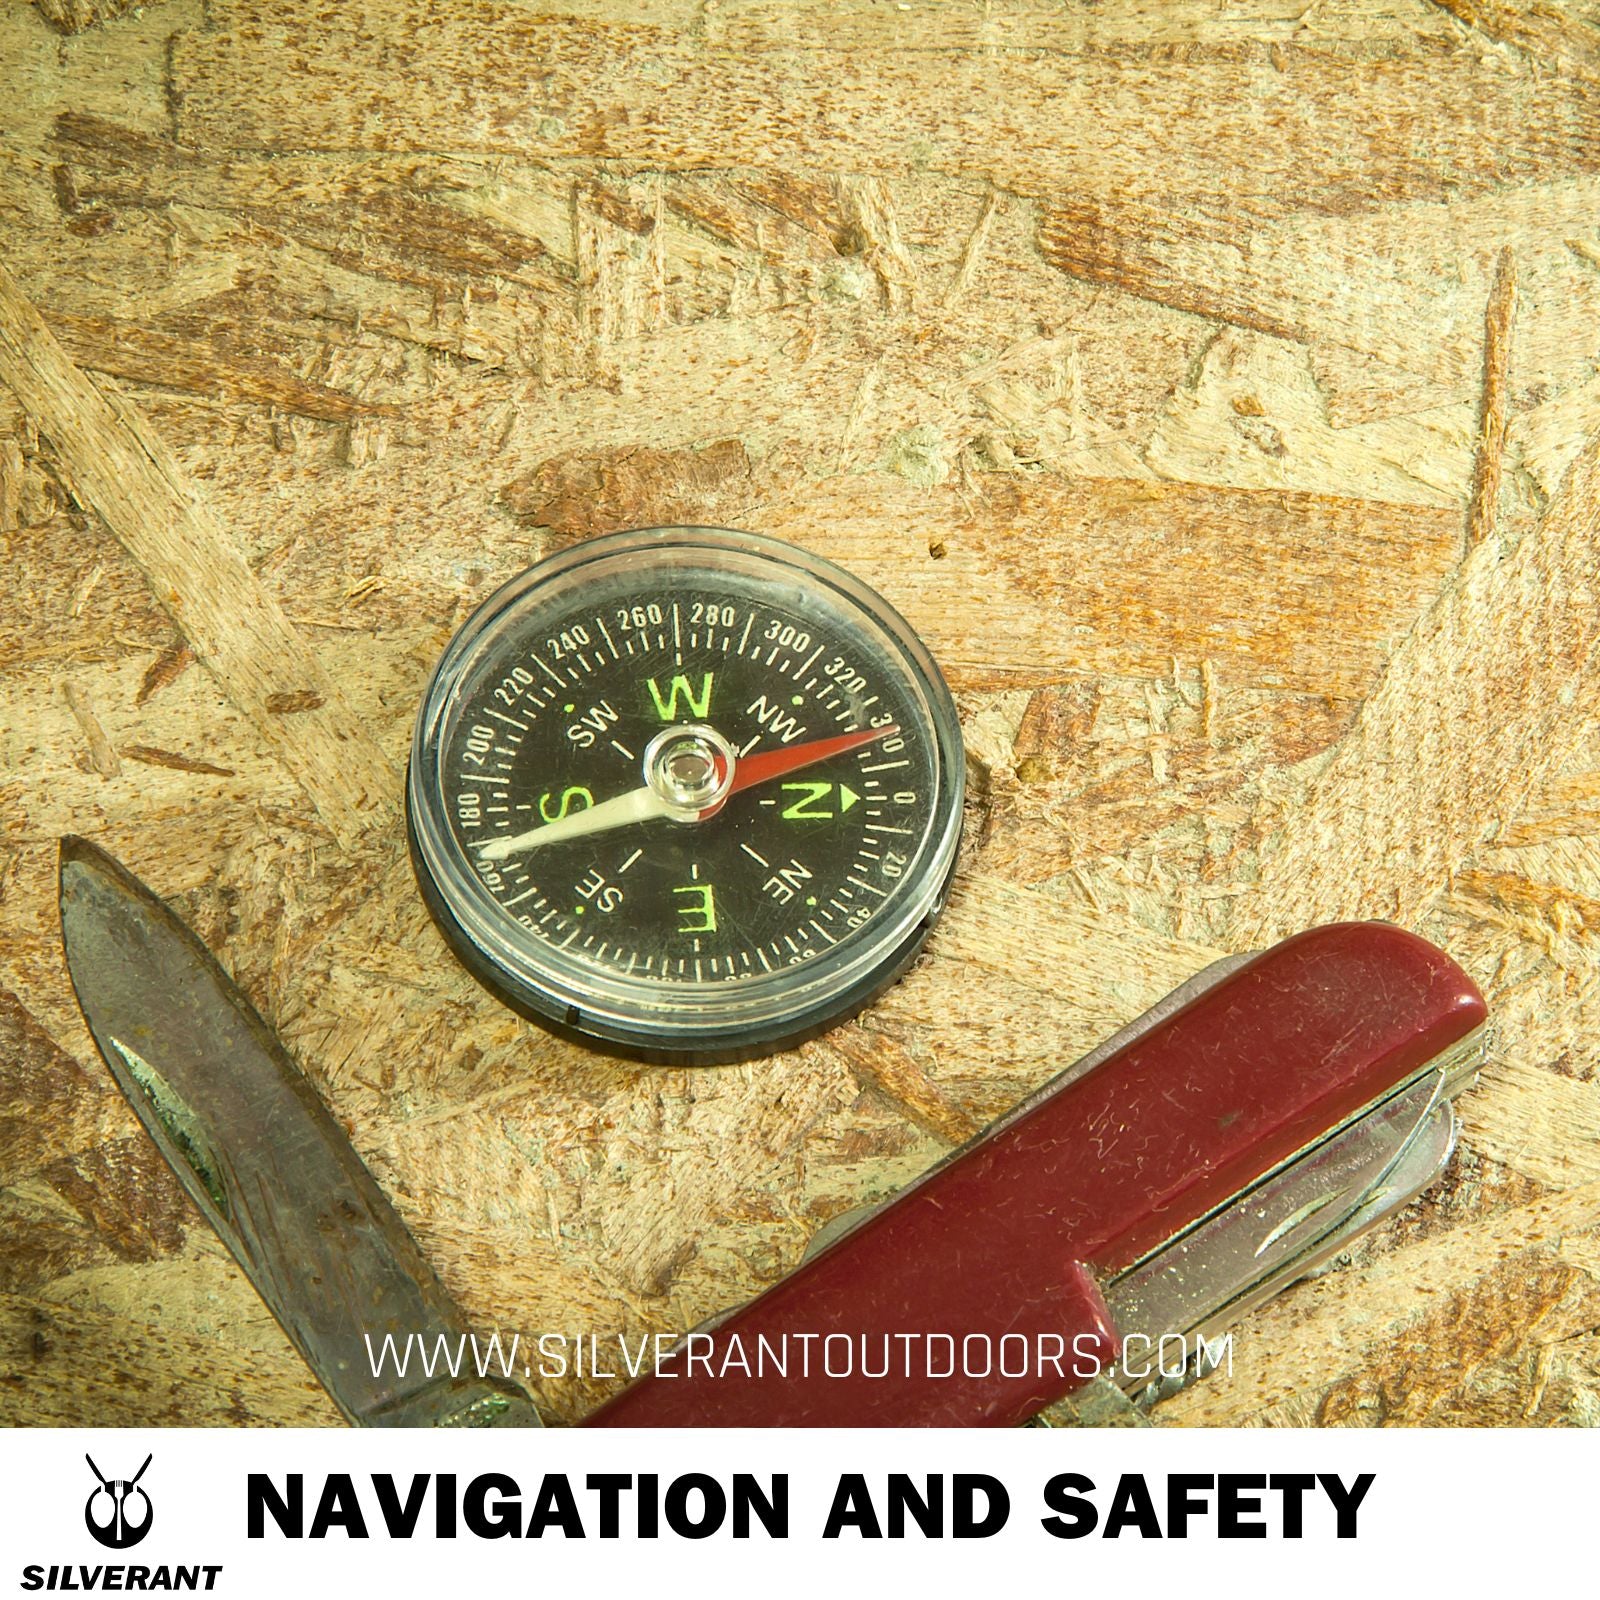 Navigation and Safety